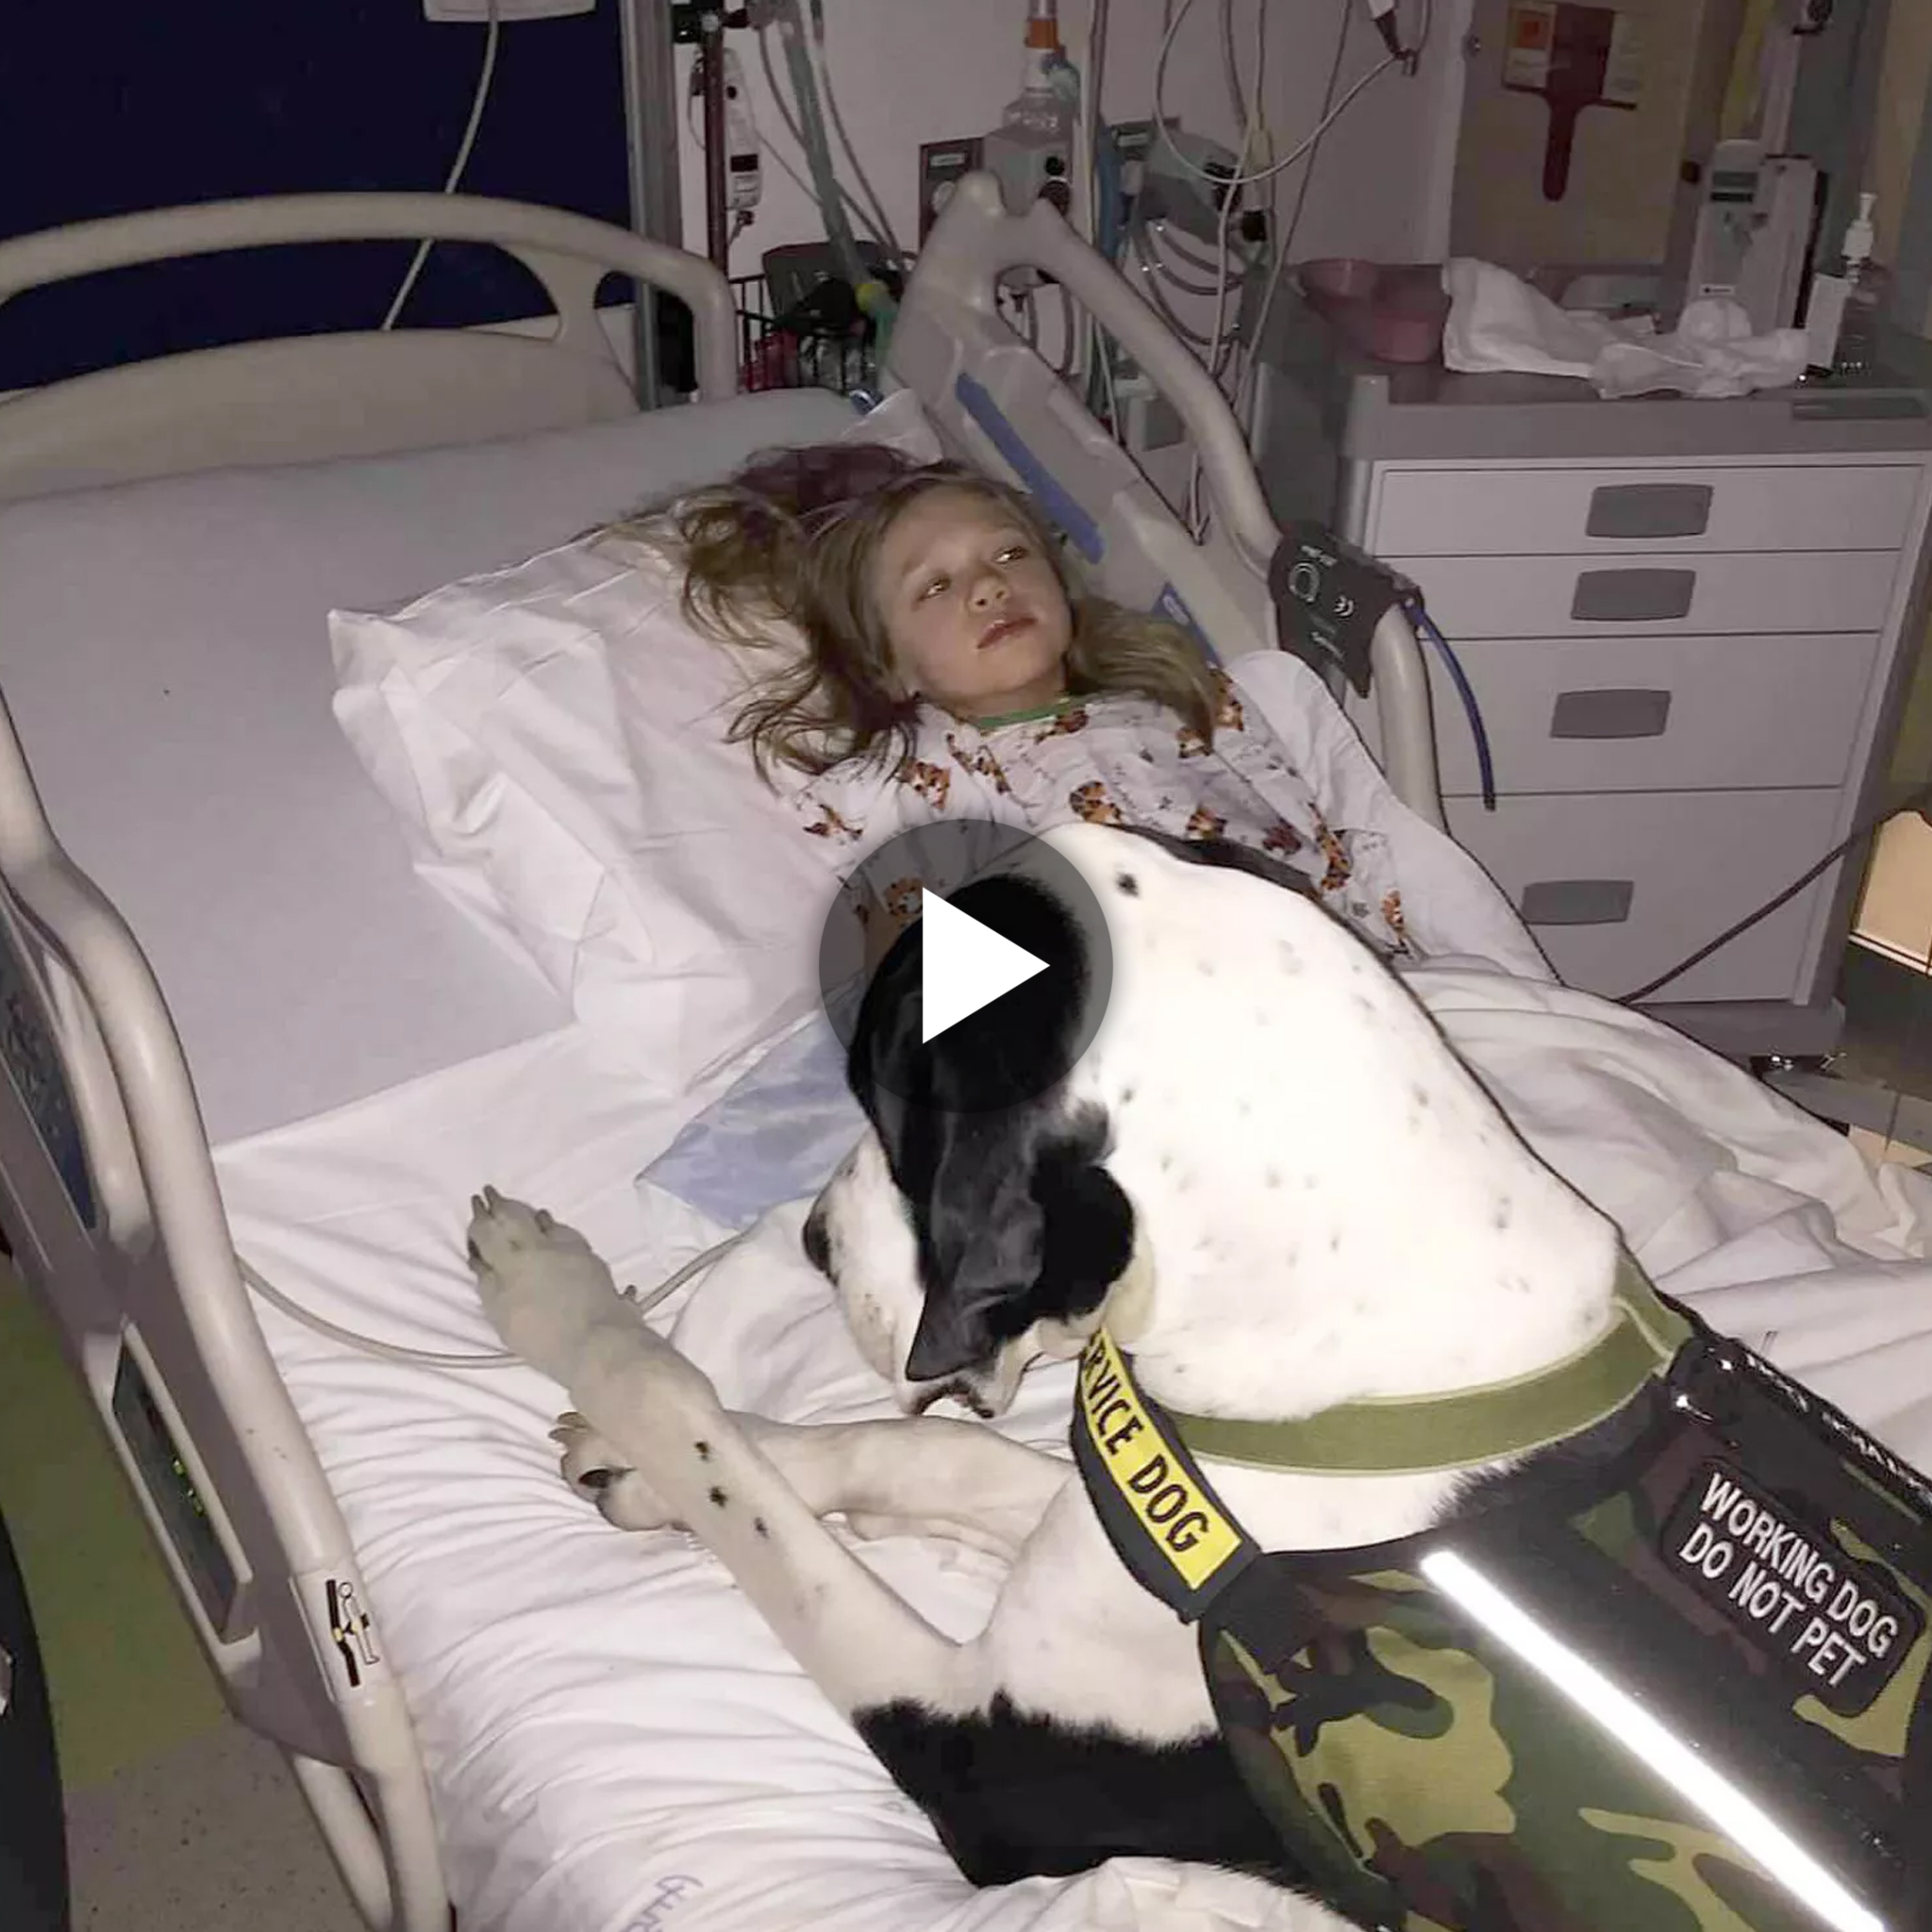 Devoted Guardian: The Heartwarming Tale of a Dog Assuming the Role of Protector, Offering Support to a Little Girl, Especially in the Absence of Her Parents at the Hospital.